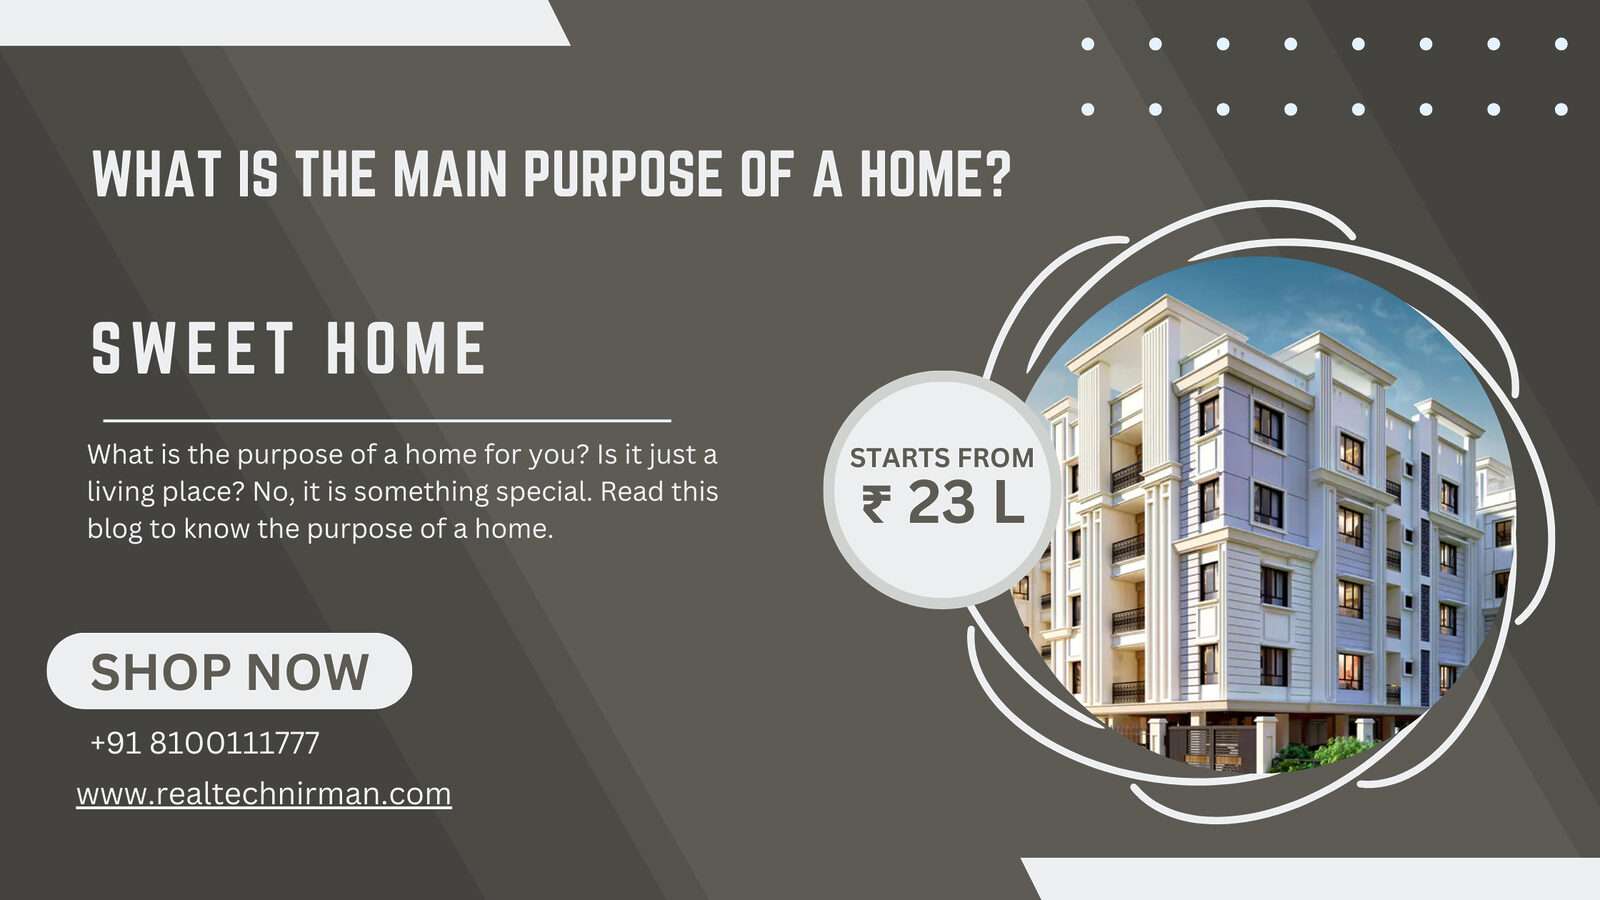 What is the main purpose of a home?